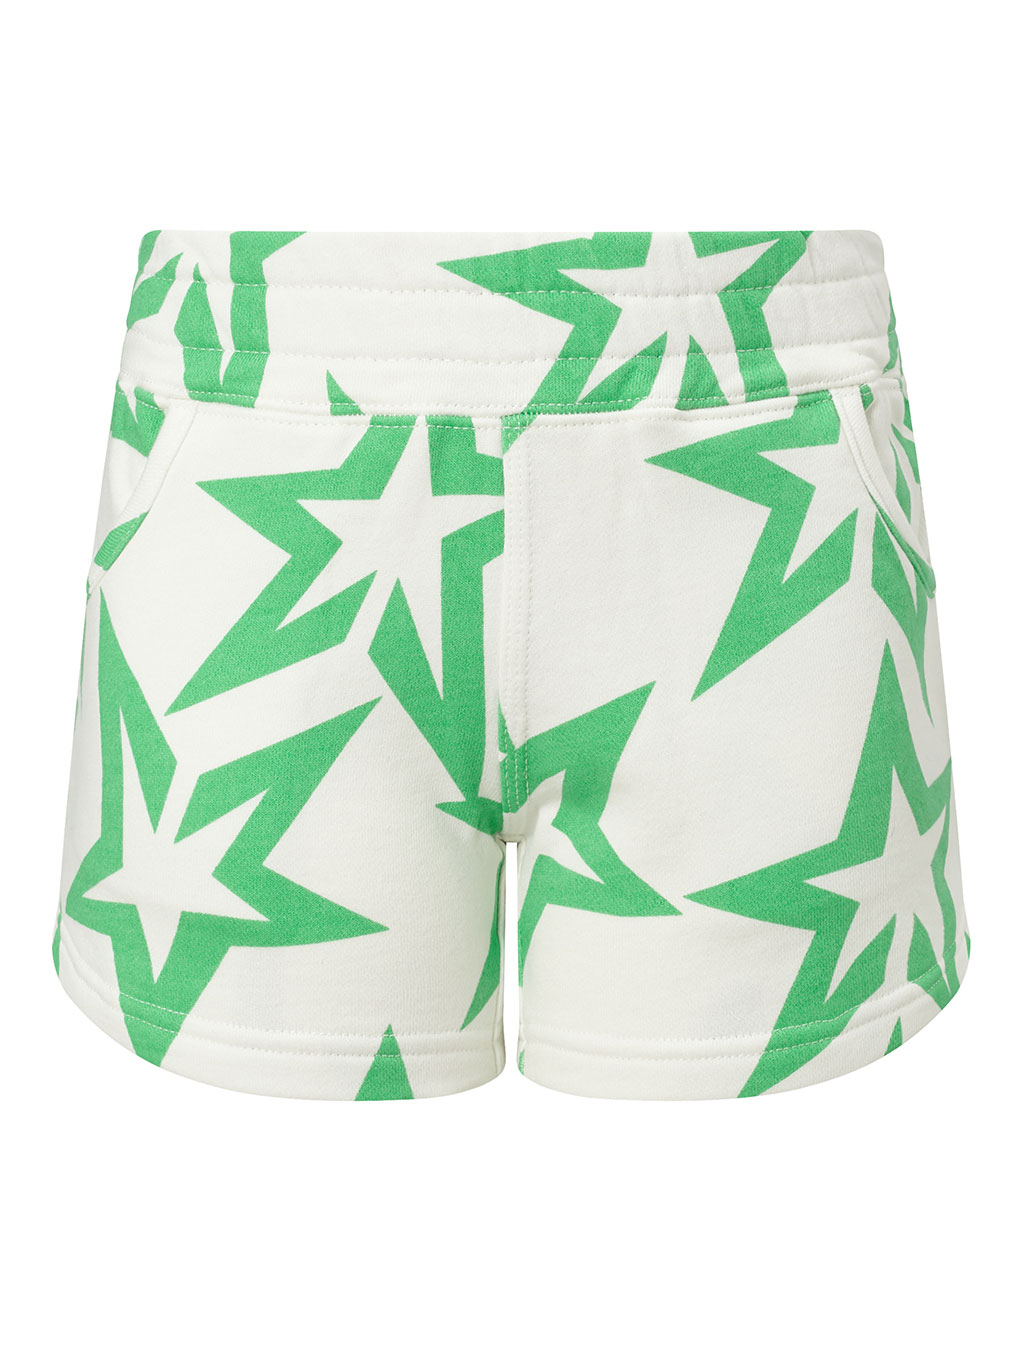 Perfect Moment Starlight Shorts Y6 In White-green-starlight-print